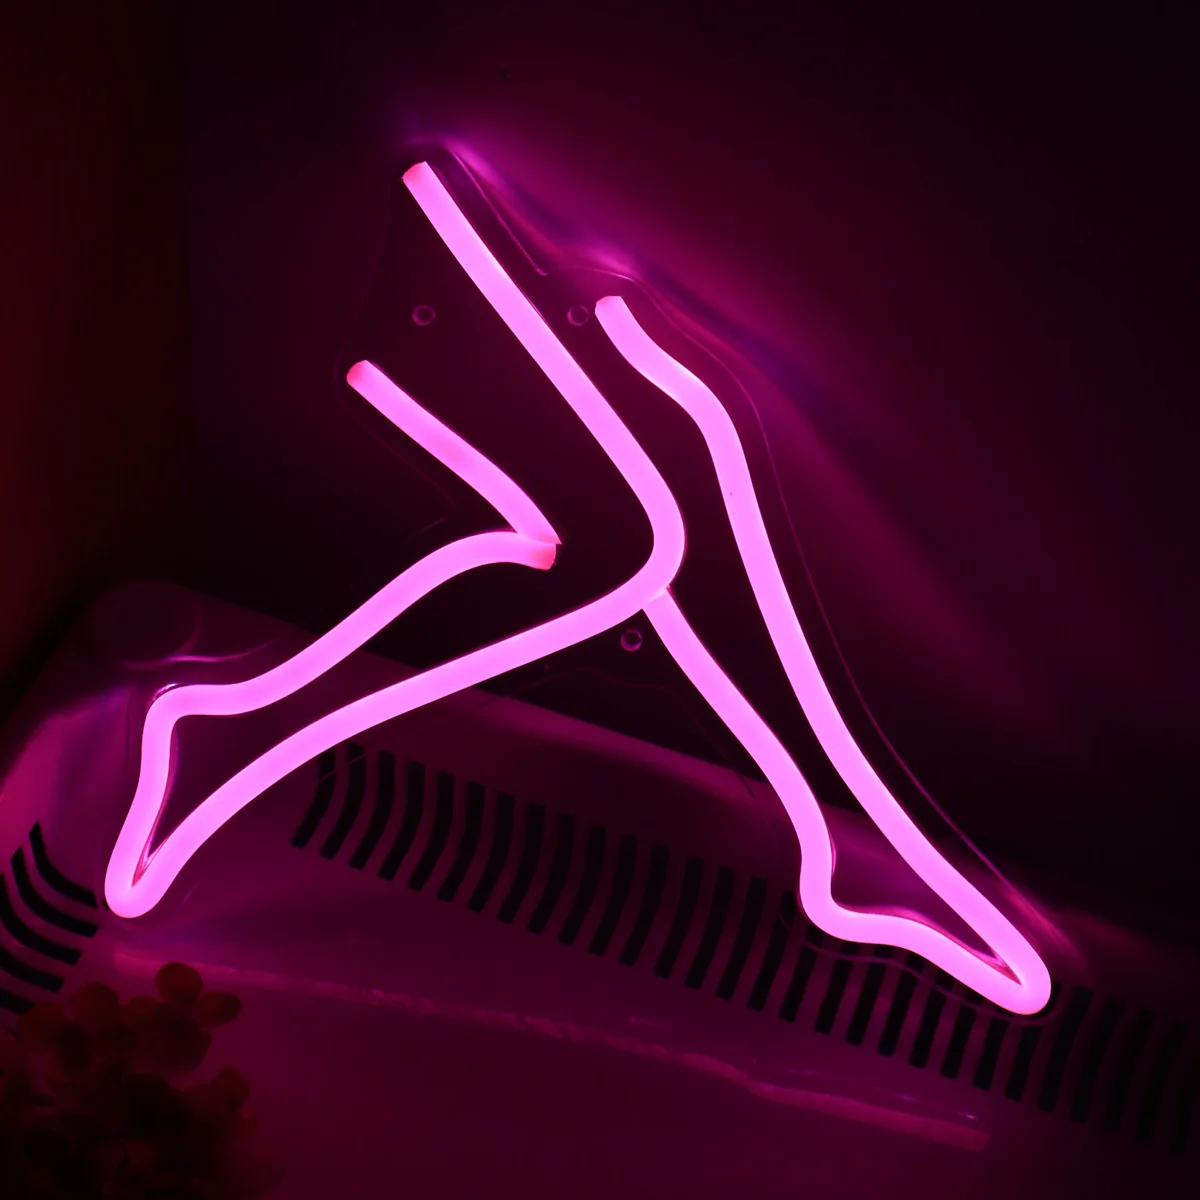 

1PC Beautiful Girl Women Lady Legs Art LED Wall Neon Sign Light For Room Gallery Party Club Hotel Decoration 10.02''*8.58''